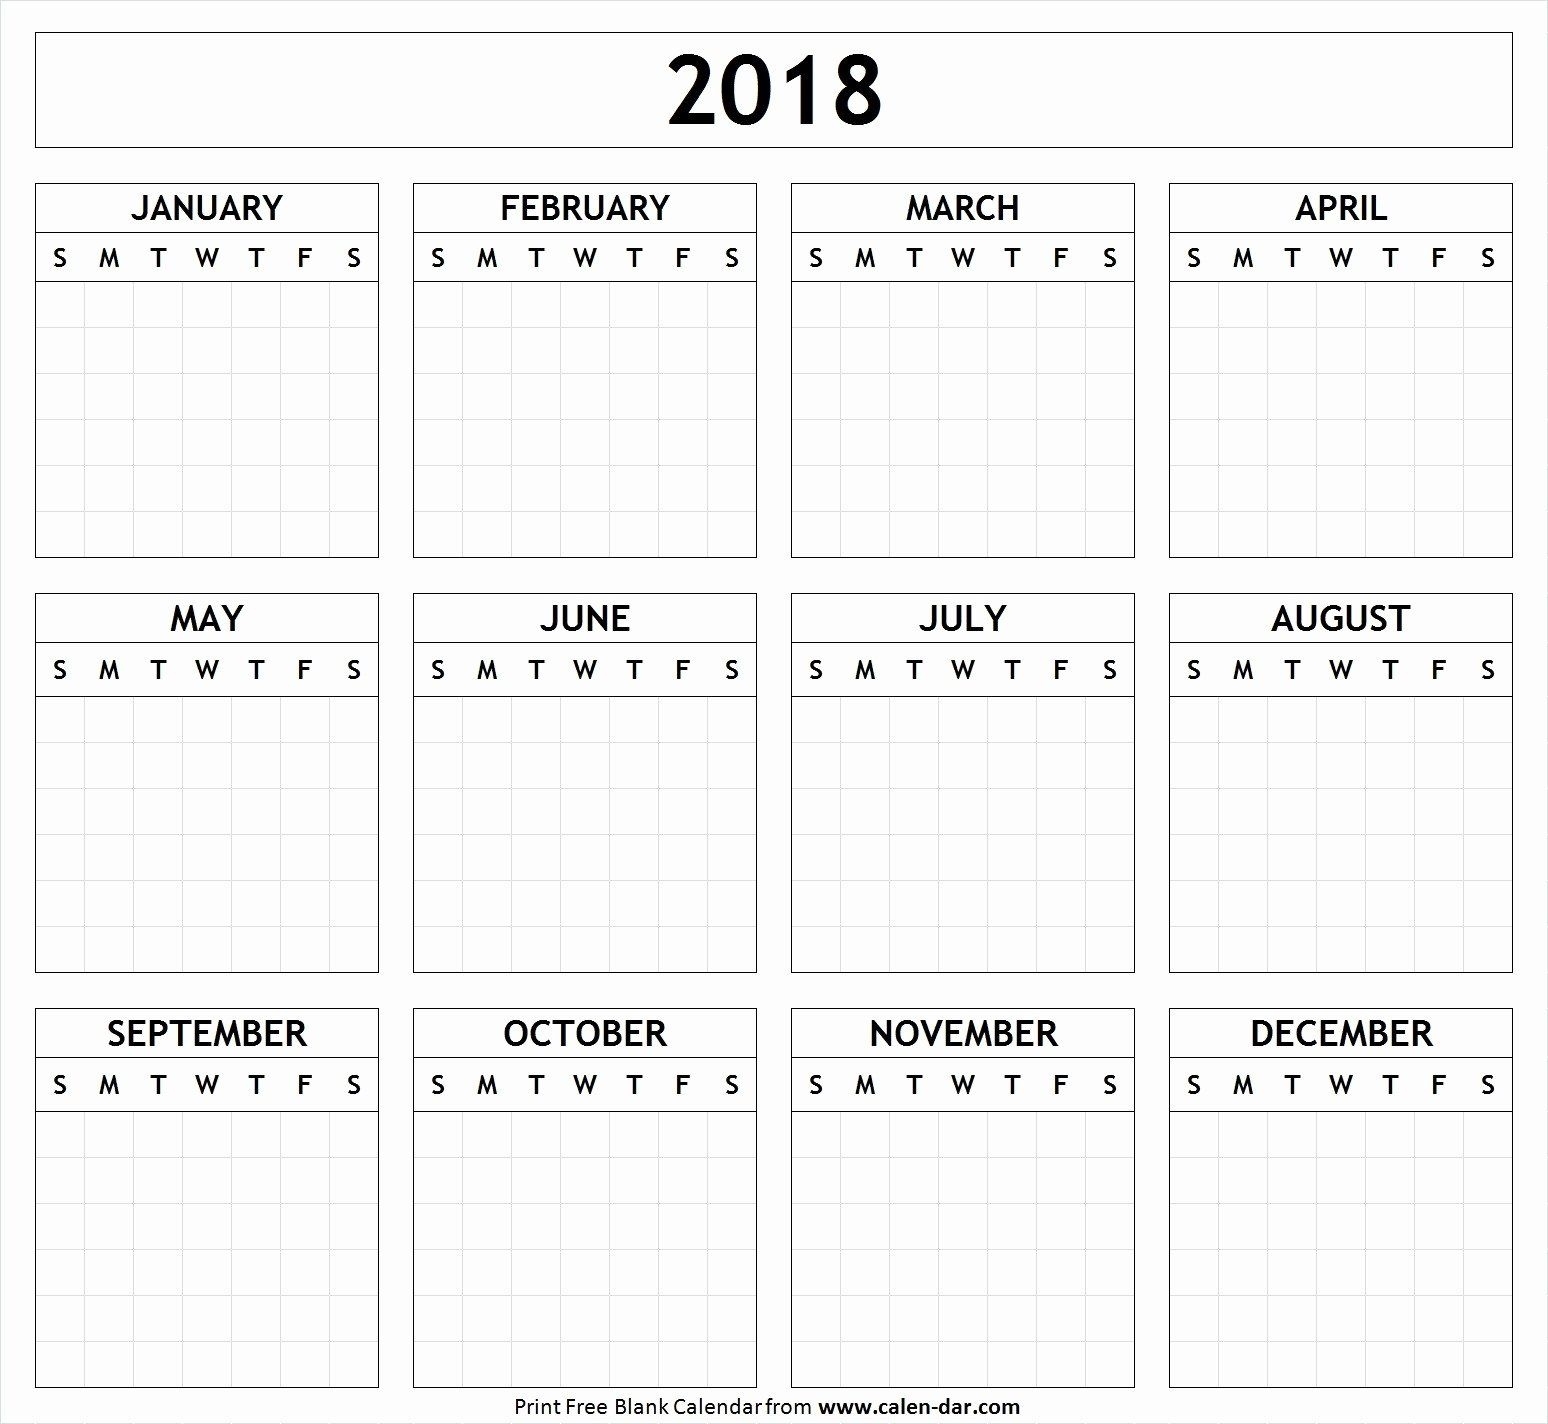 Calendar Template For Pages Mac New Mac Numbers Templates Calendar Template Apple Pages